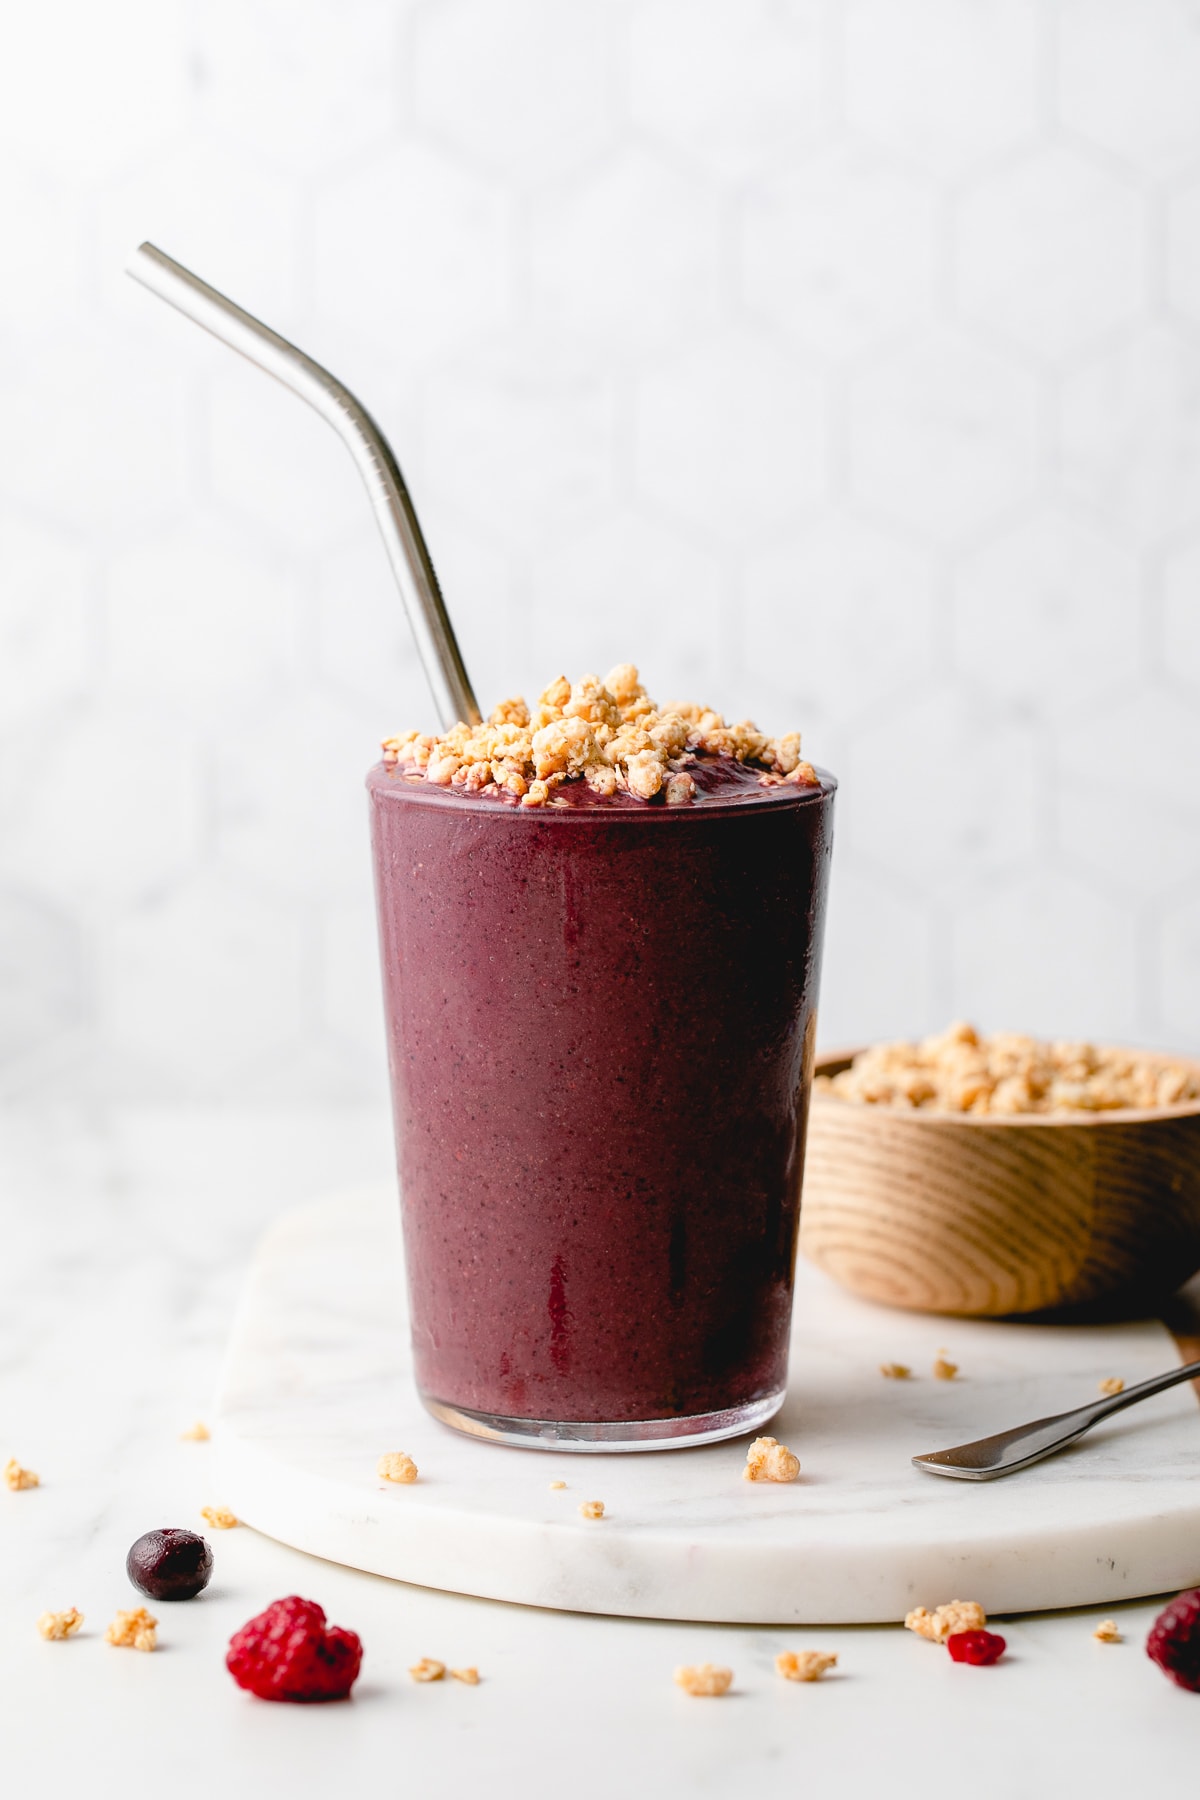 head on view of acai smoothie with spoon and items surrounding.